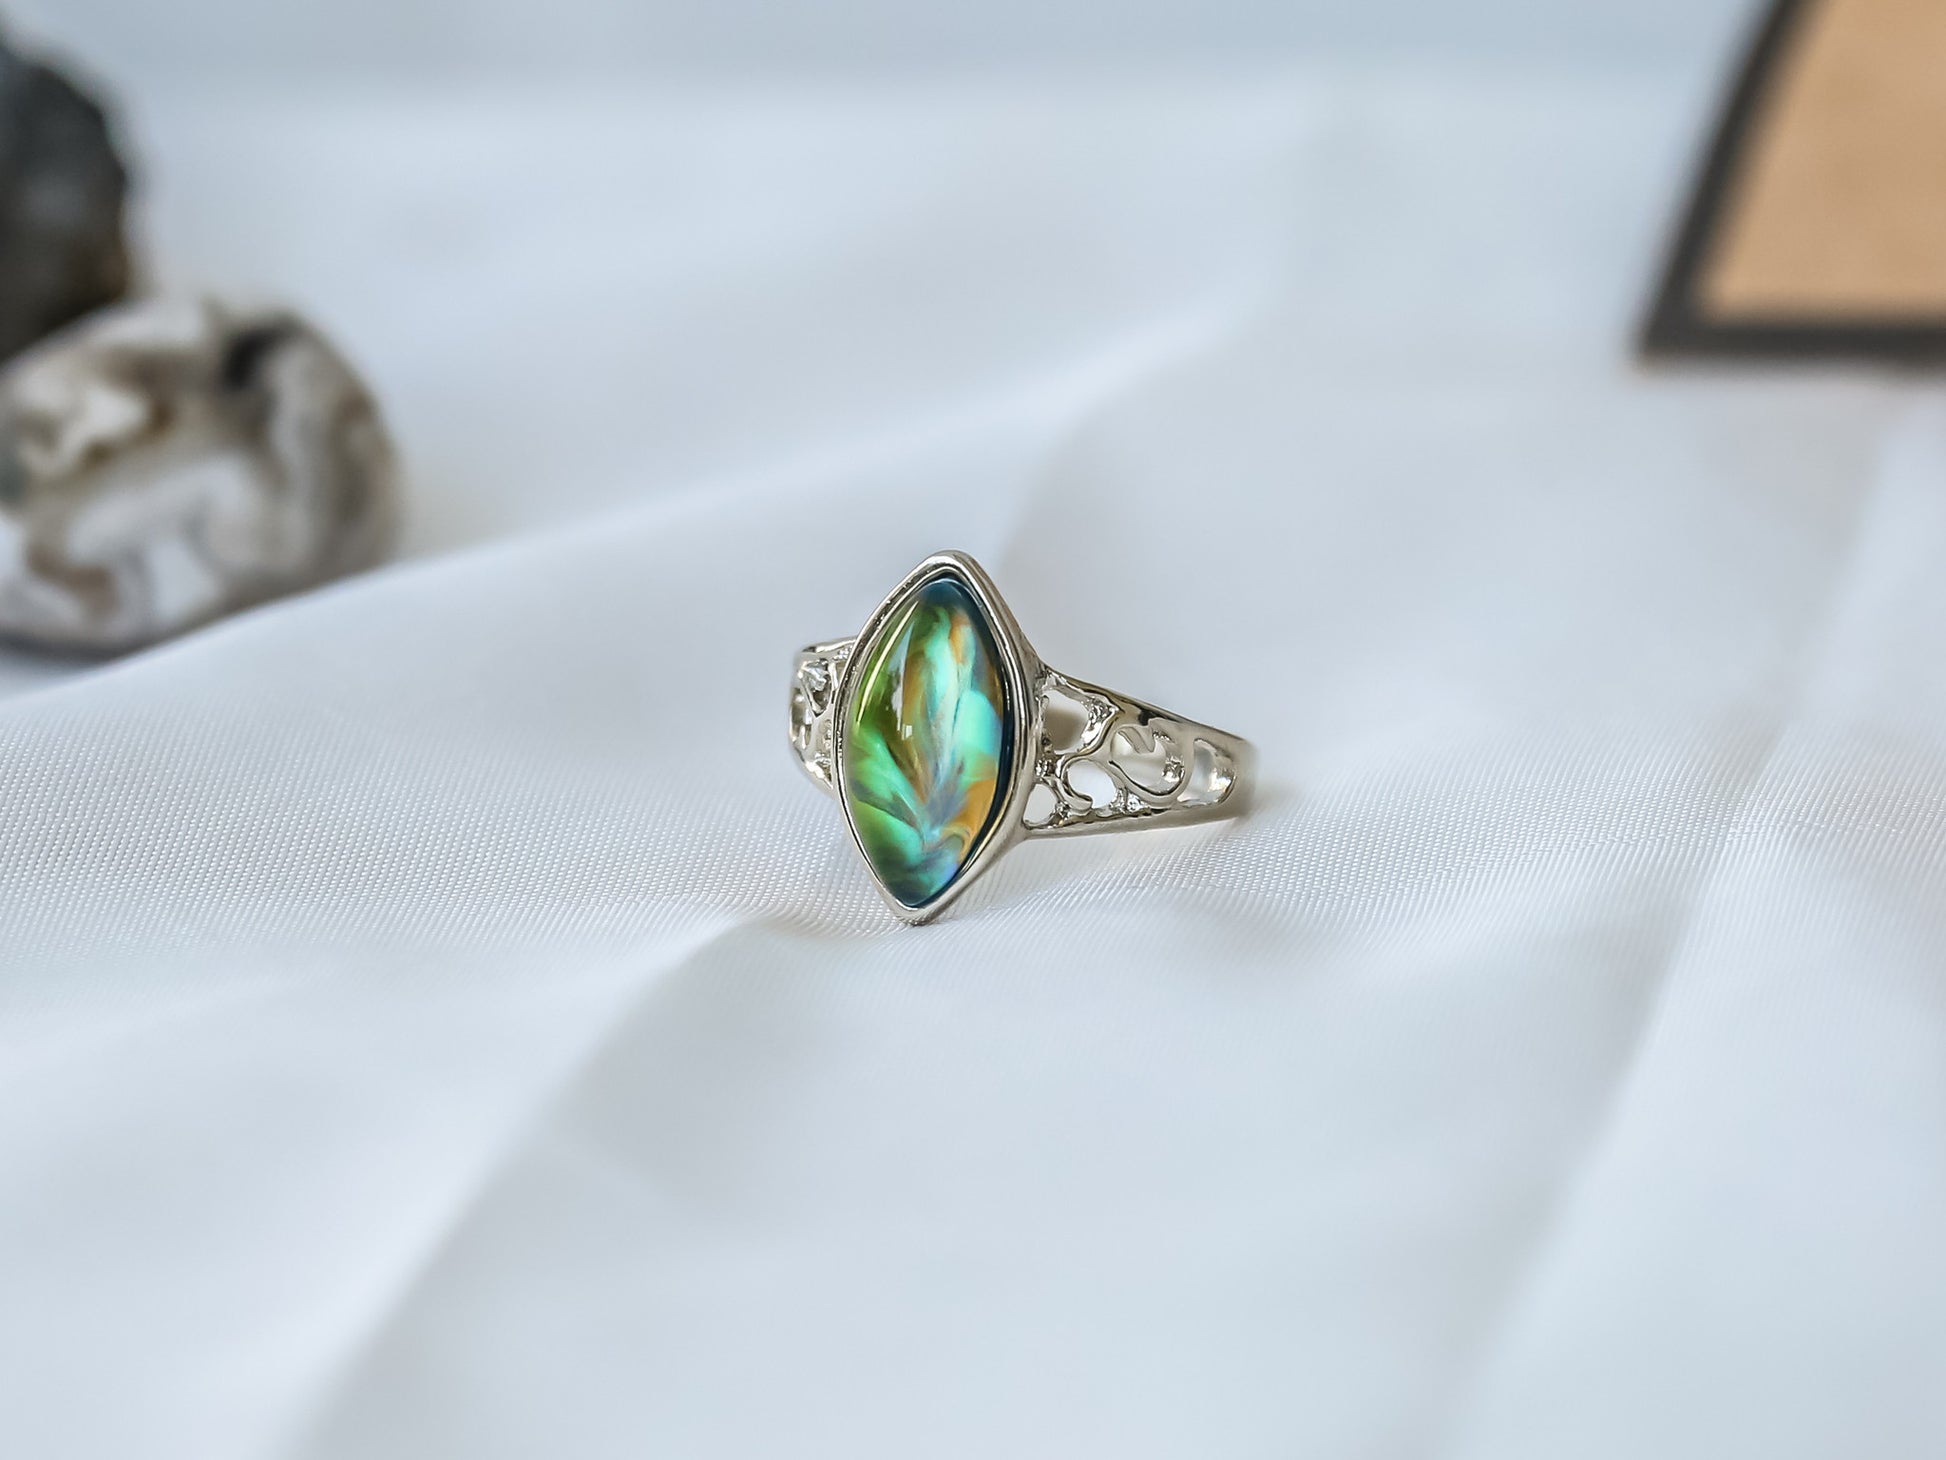 Limited Edition Opalescent Horses Eye Stone Mood Ring.